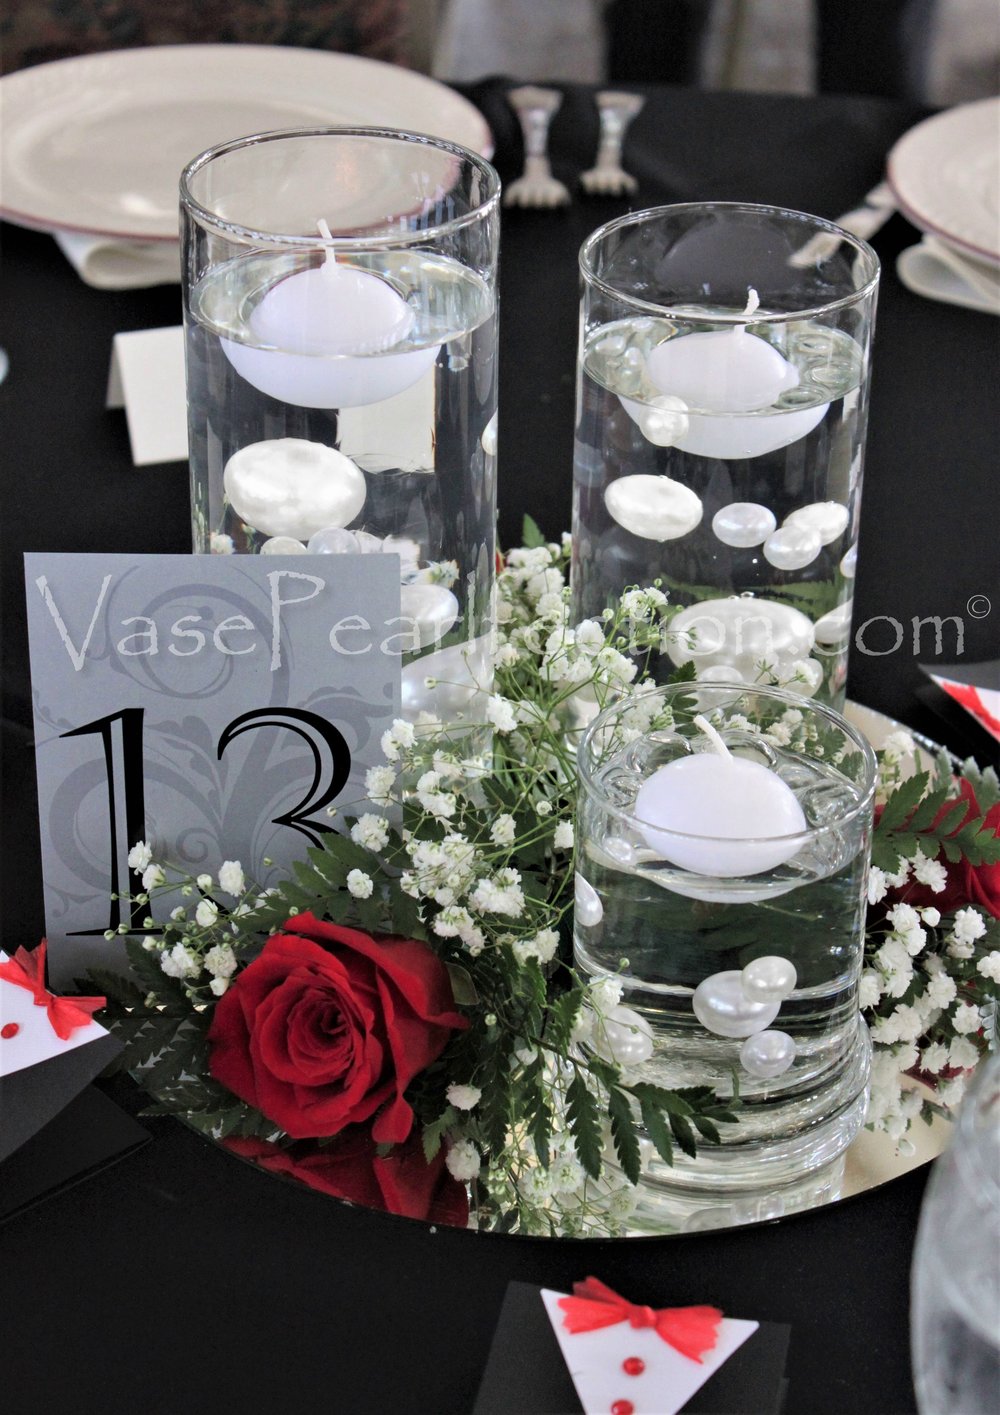 Floating White Pearls-Shiny-No Holes-Fills 1 Gallon of Floating Pearls & Crystal Clear Transparent Gels For Vases-With Exclusive Measured Gels Prep Bag-Option: 3 Submersible Fairy Lights Strings